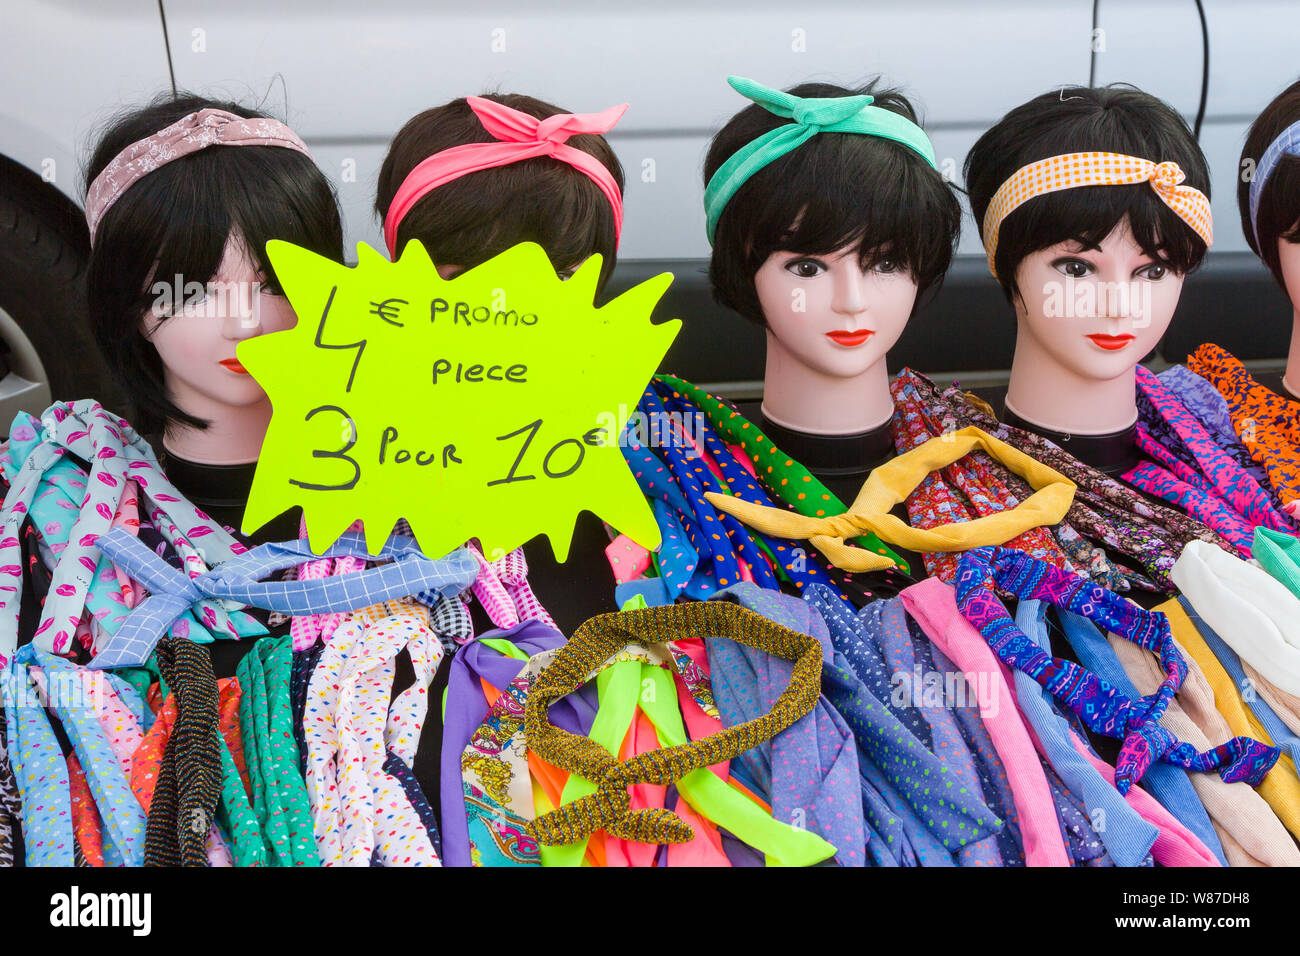 Colourful hairbands for sale on a stall in hte Saturday market in Honfleur, Normandy, France Stock Photo